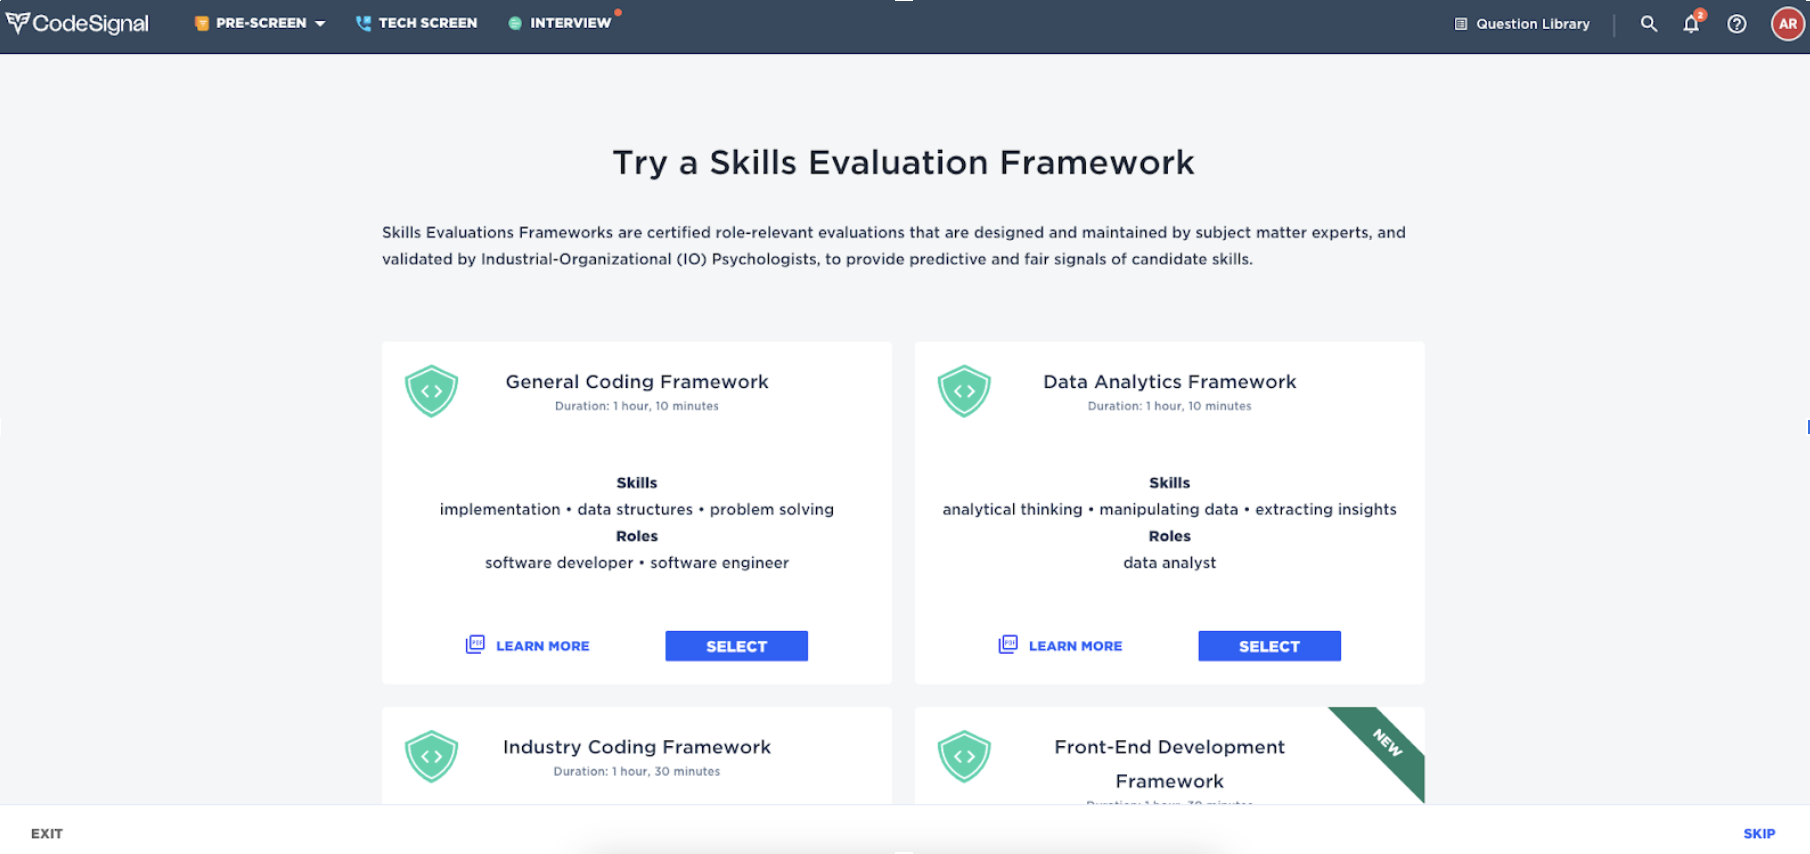 2_Creating_a_Pre-Screen_backed_by_a_Skills_Evaluation_Framework.png